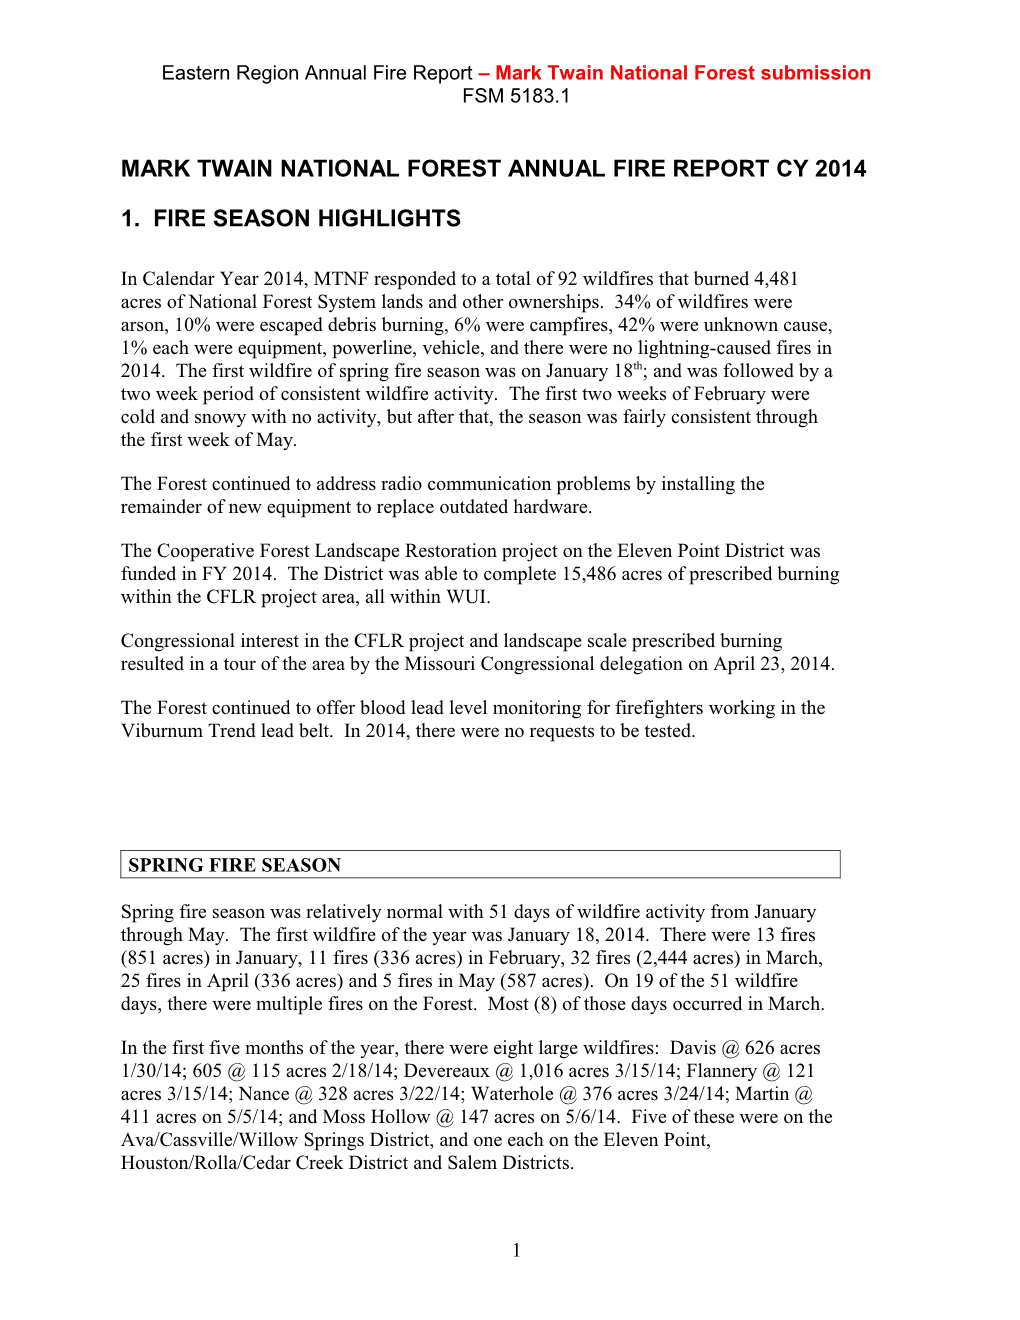 Mark Twain National Forest Annual Fire Report Cy 2014